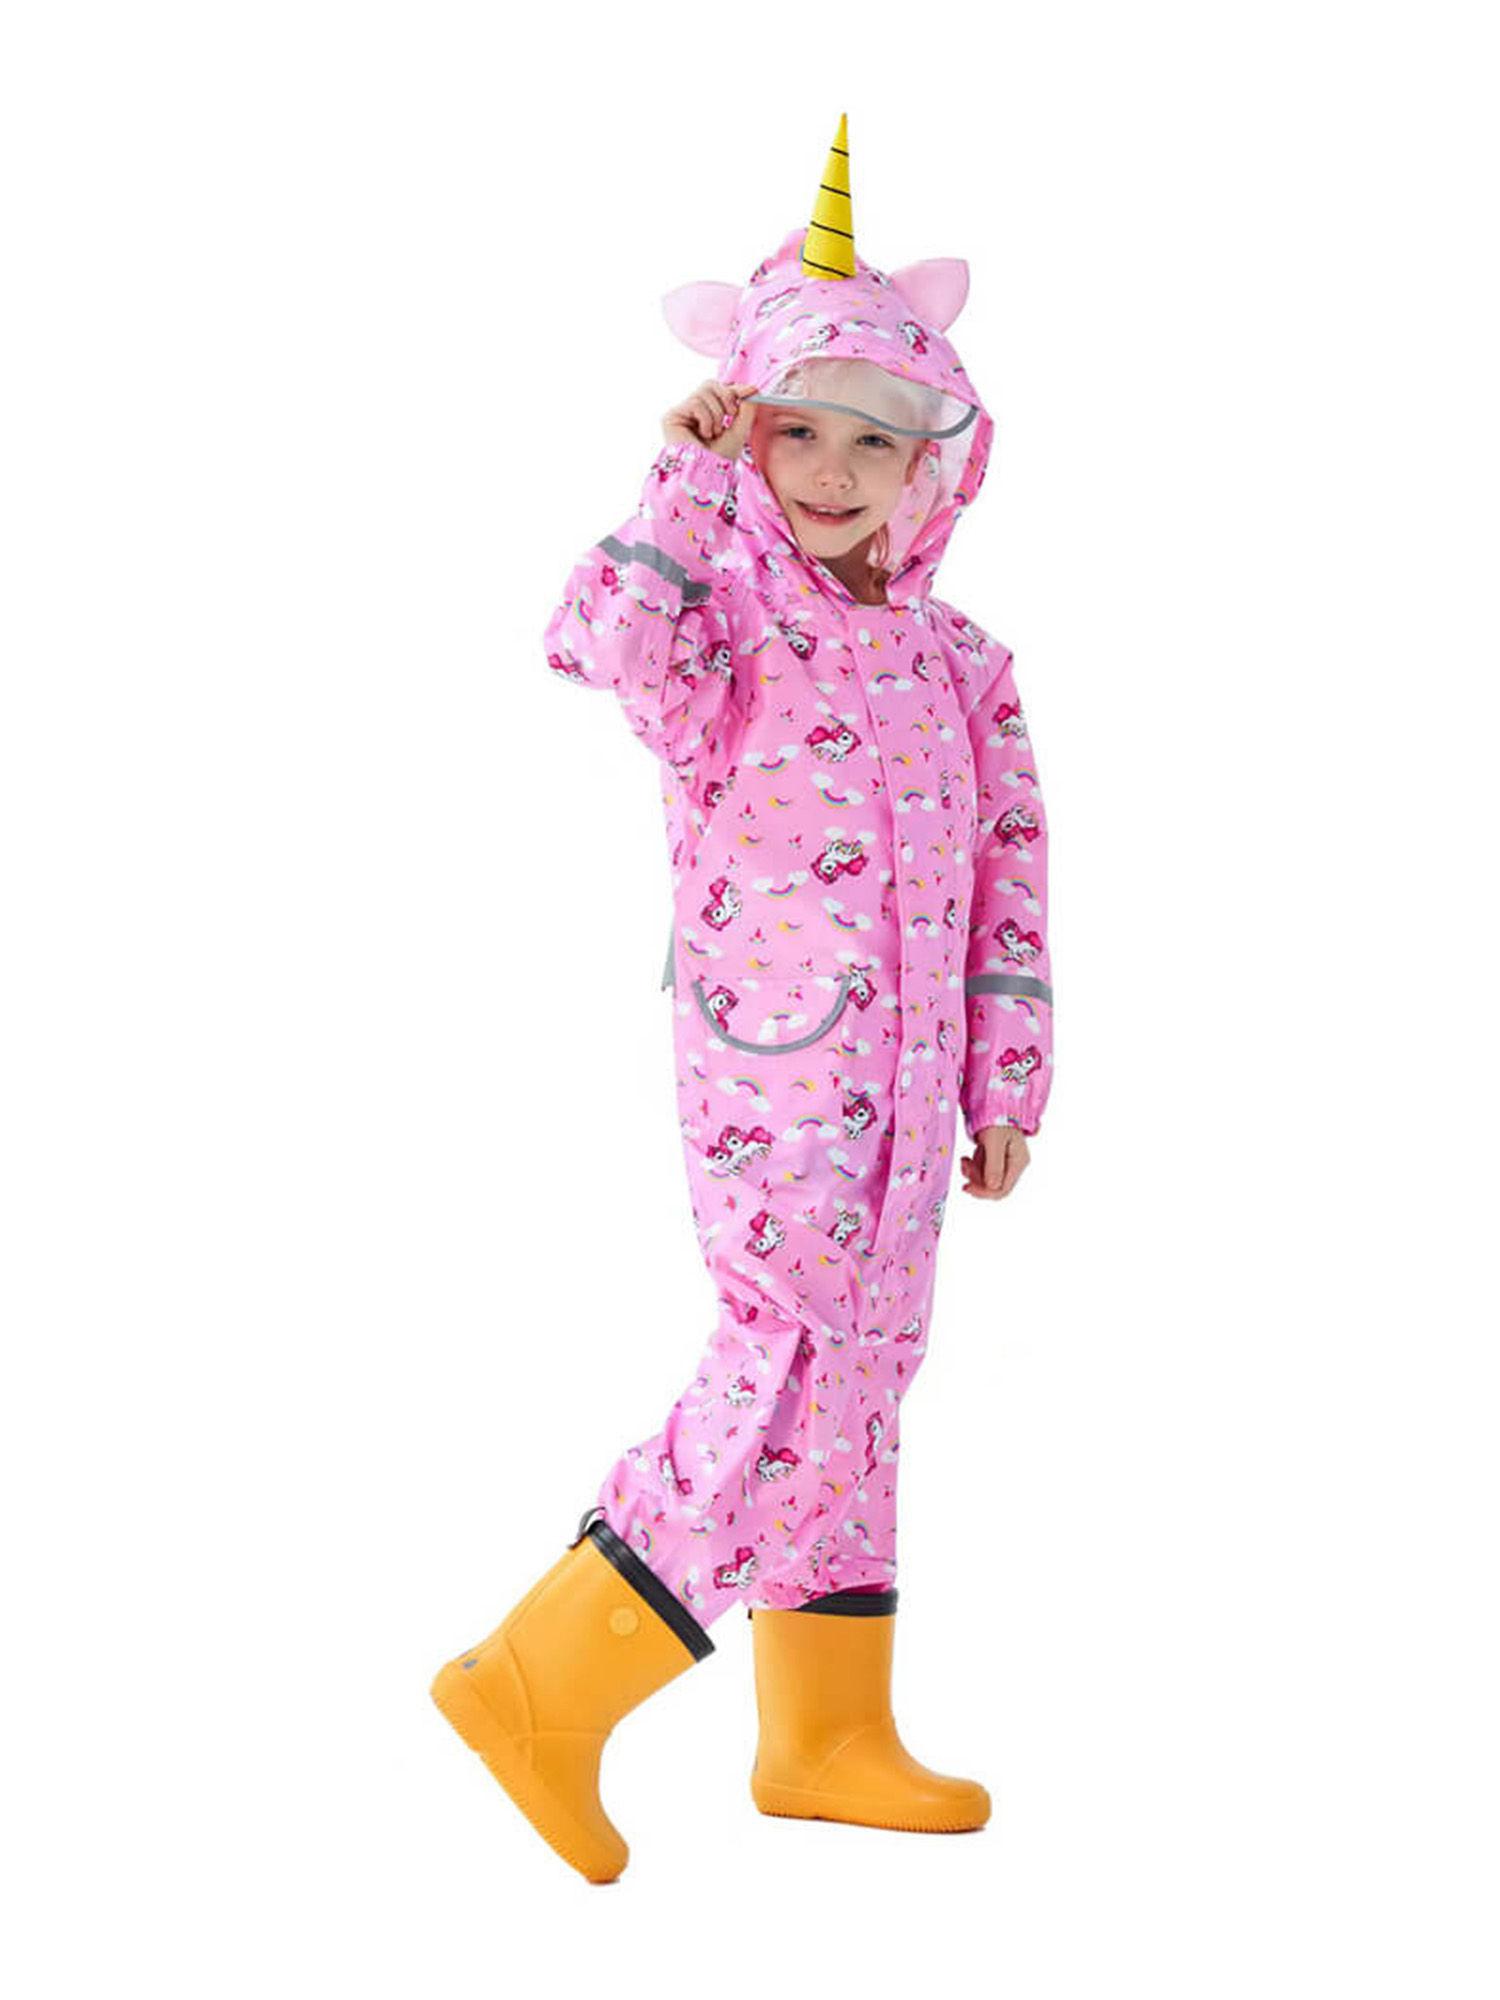 all over raincoat for kids-pink unicorn theme